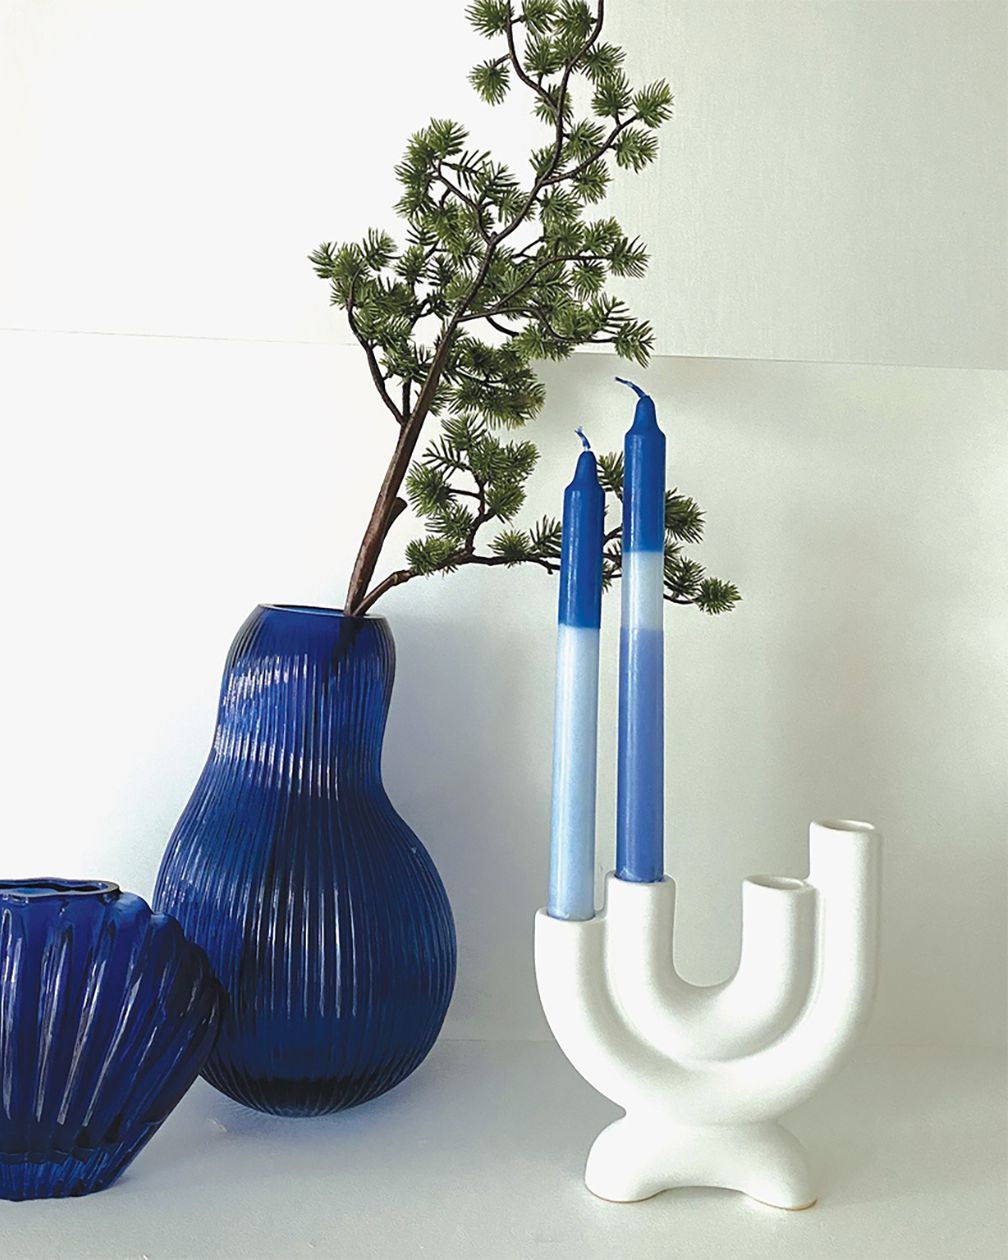 SET OF 4 LONG TWO-COLOR BLUE CANDLES